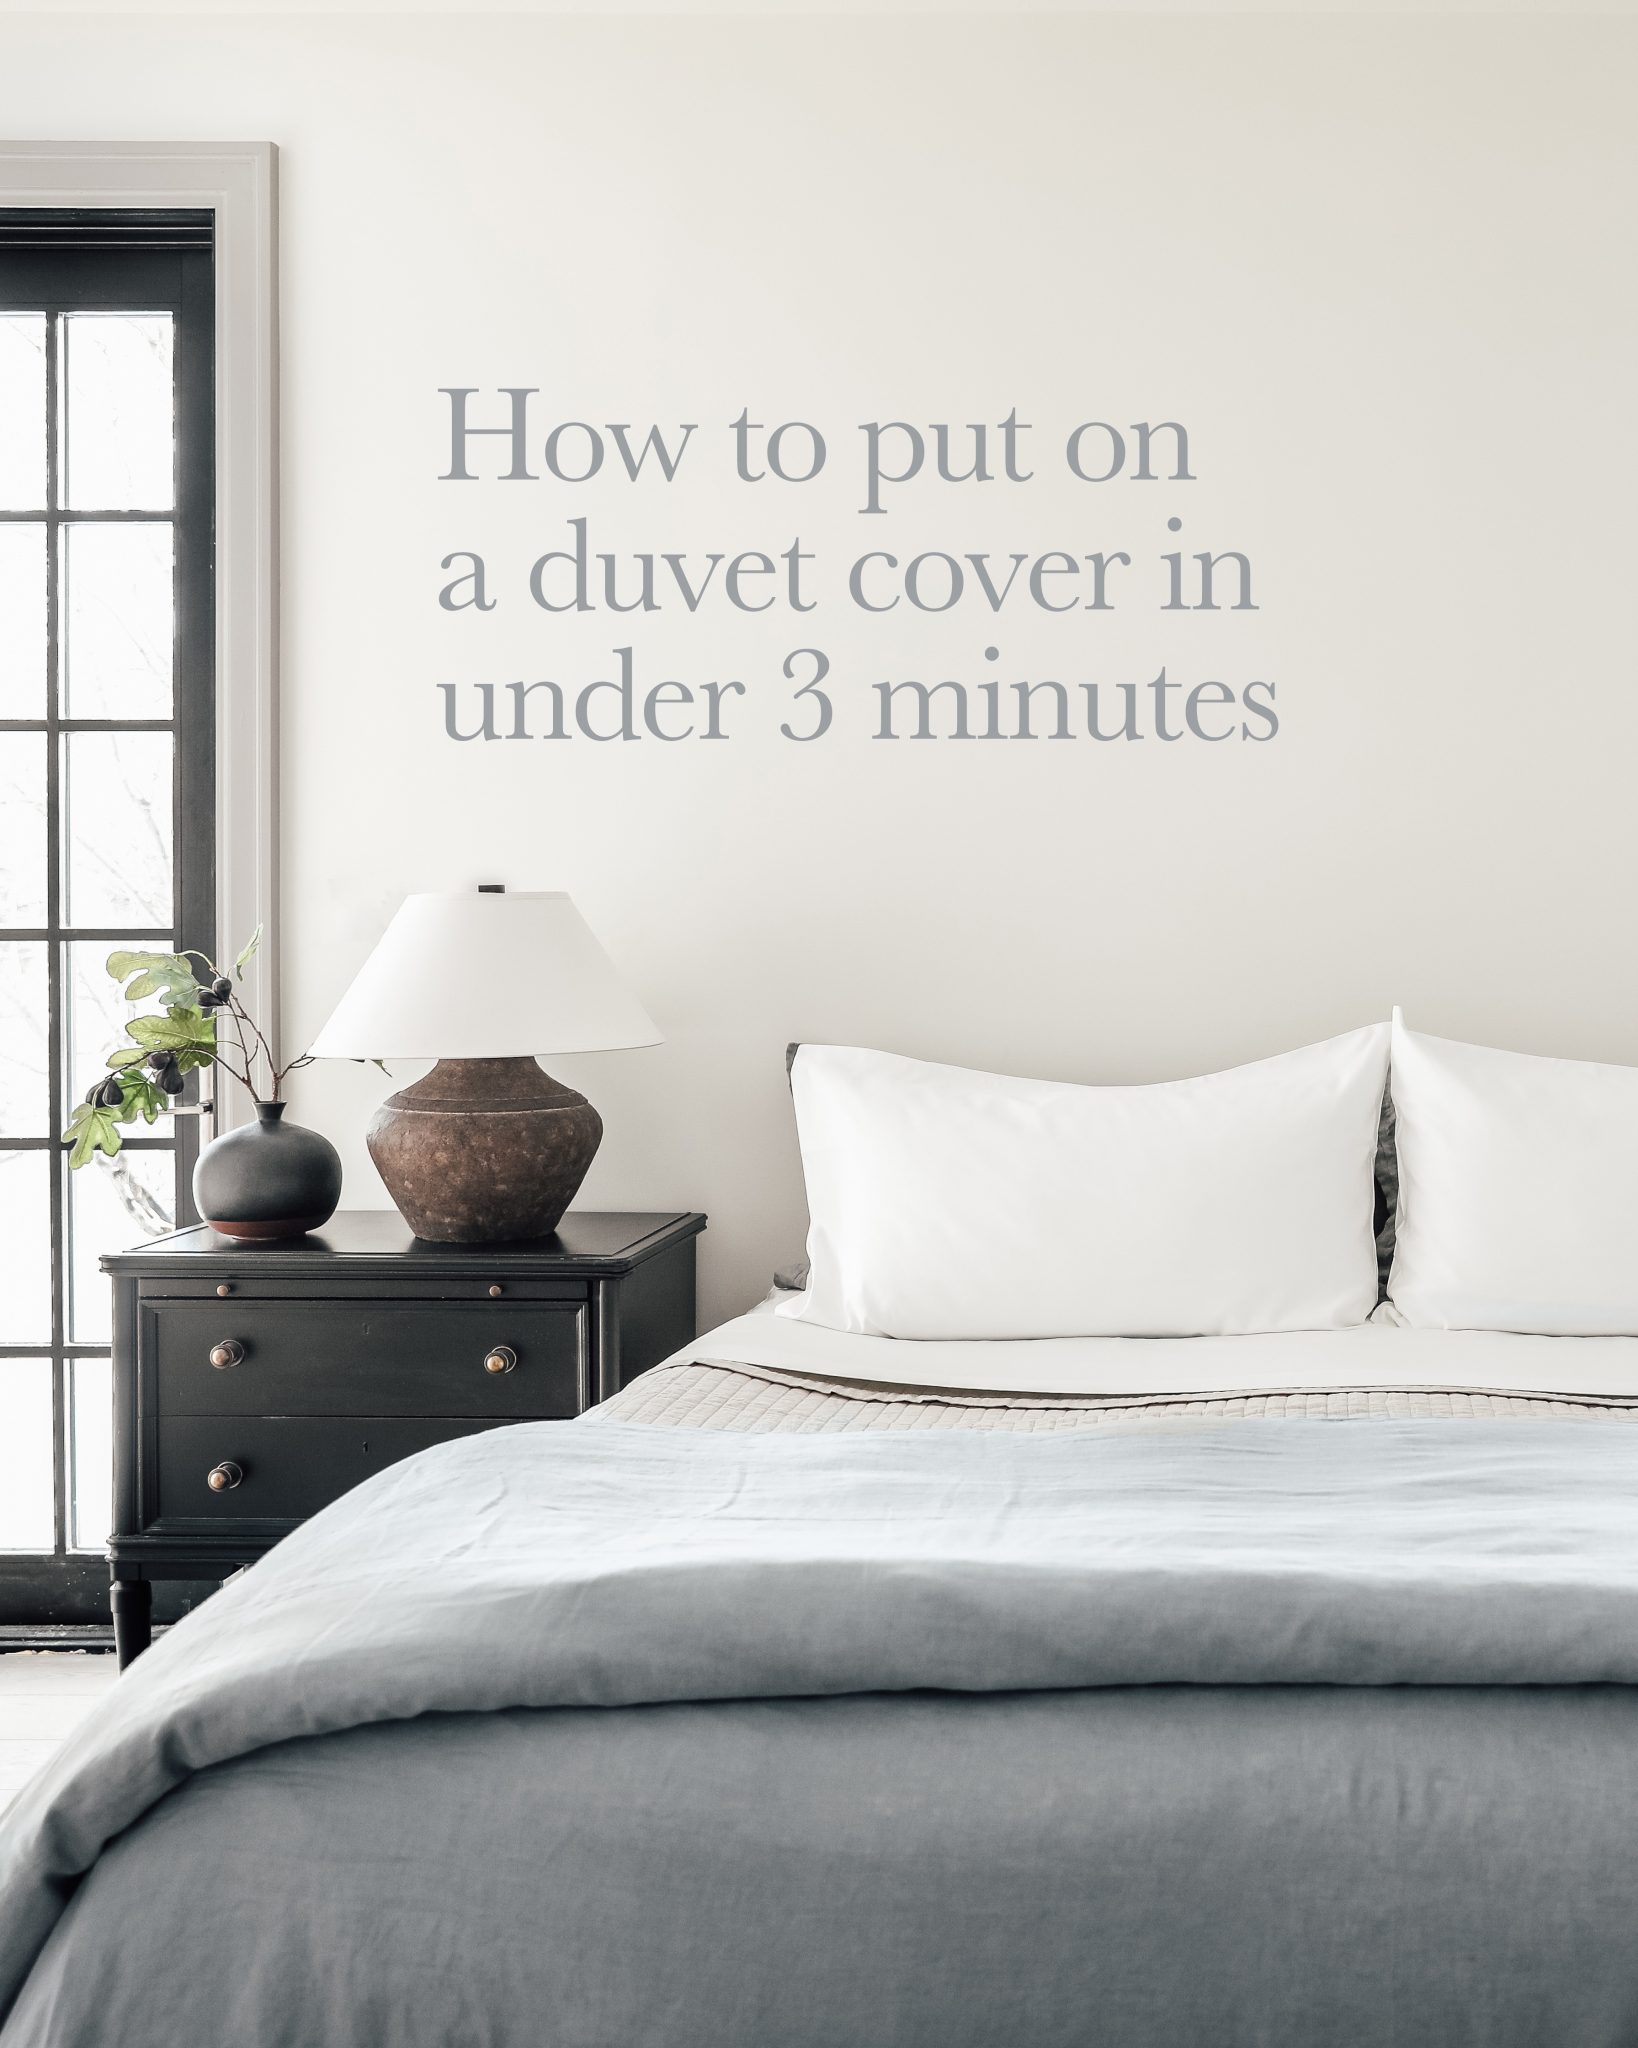 How To Put On A Duvet Cover In Under 3, How To Fix Duvet Cover Zipper